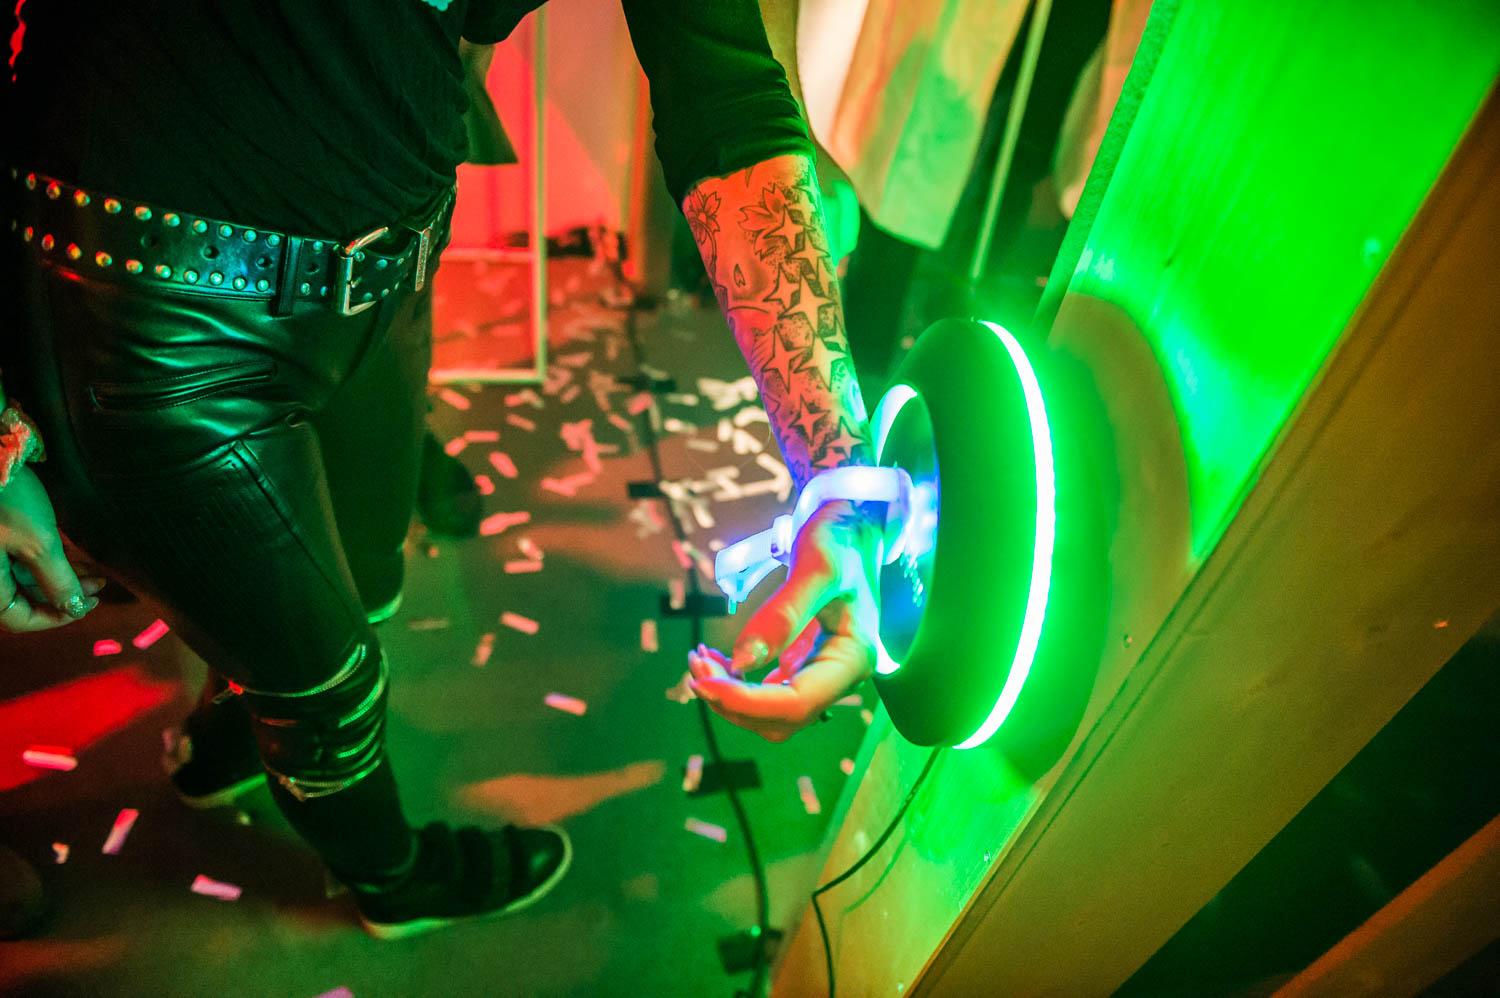 A person in leather pants scans their glowing white wristband.